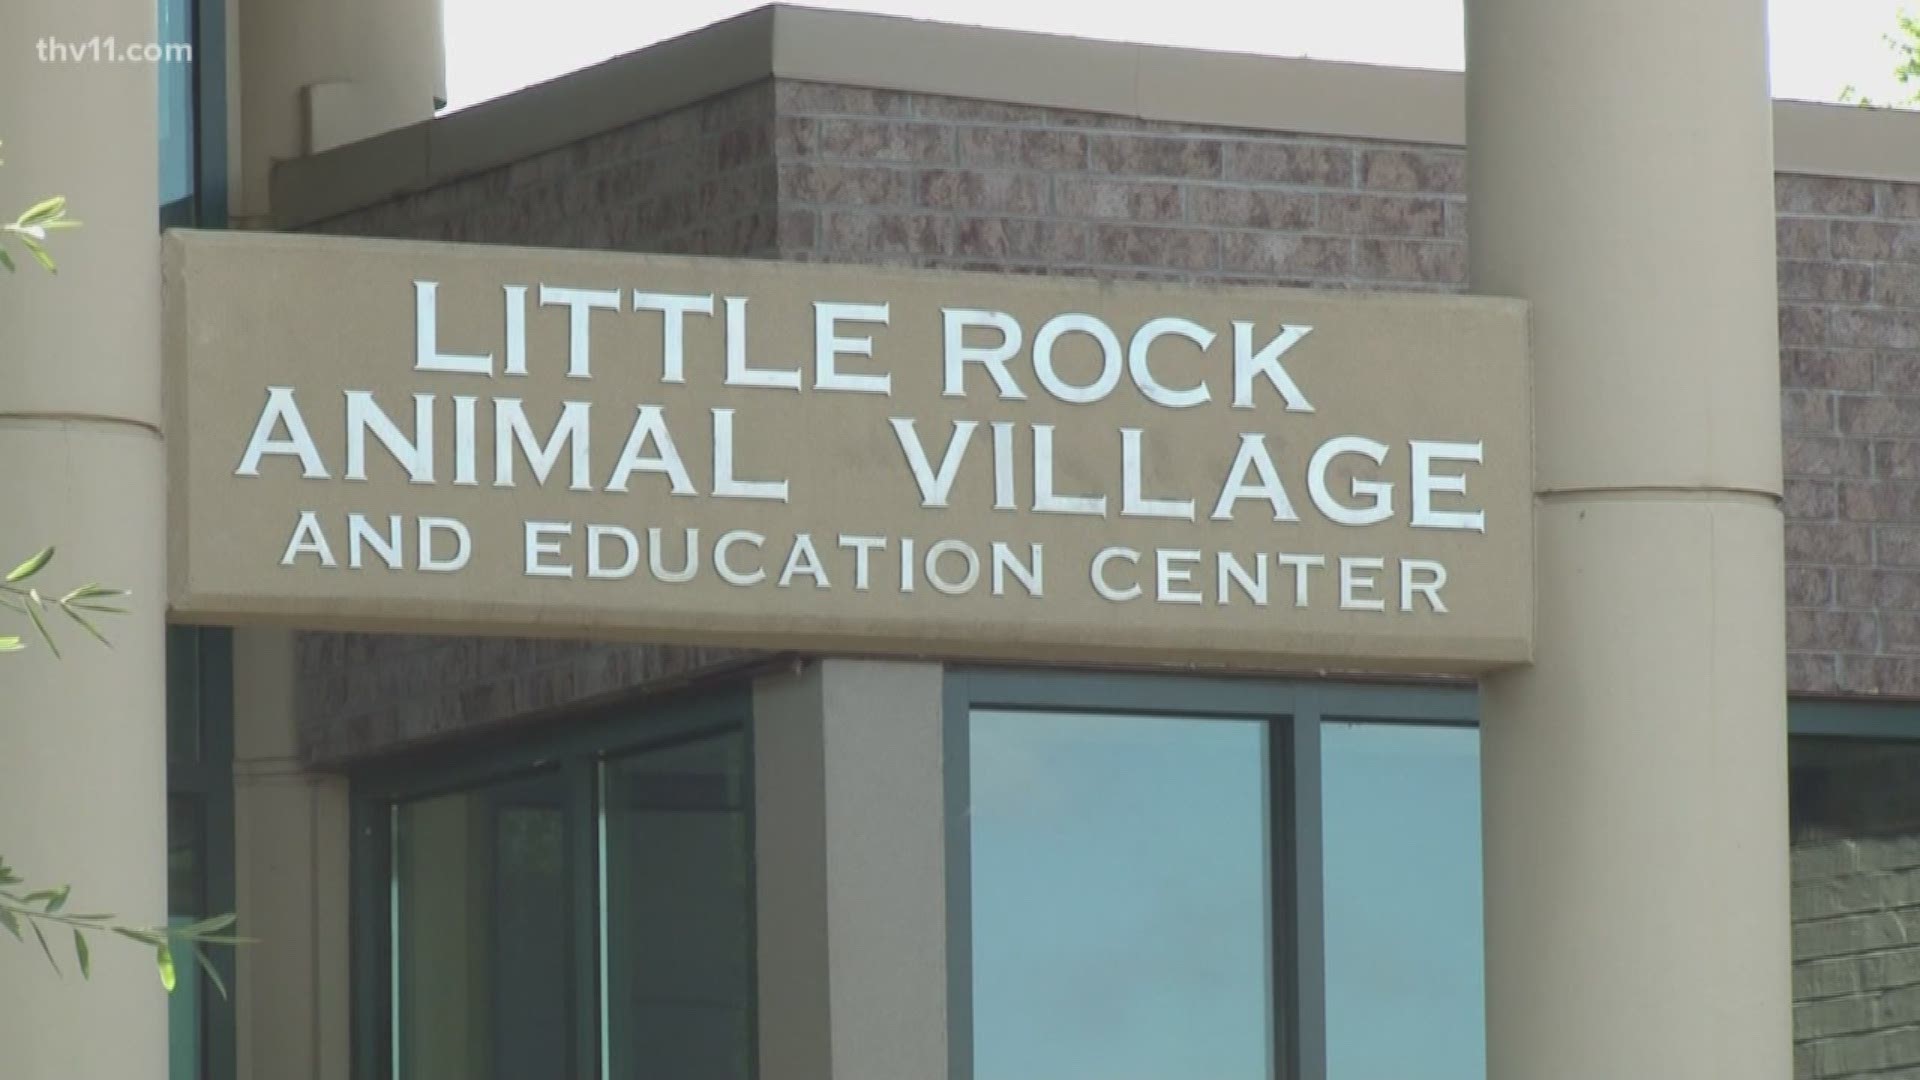 The Little Rock Animal Village is asking for your help as it deals with a spike in the number of homeless animals.